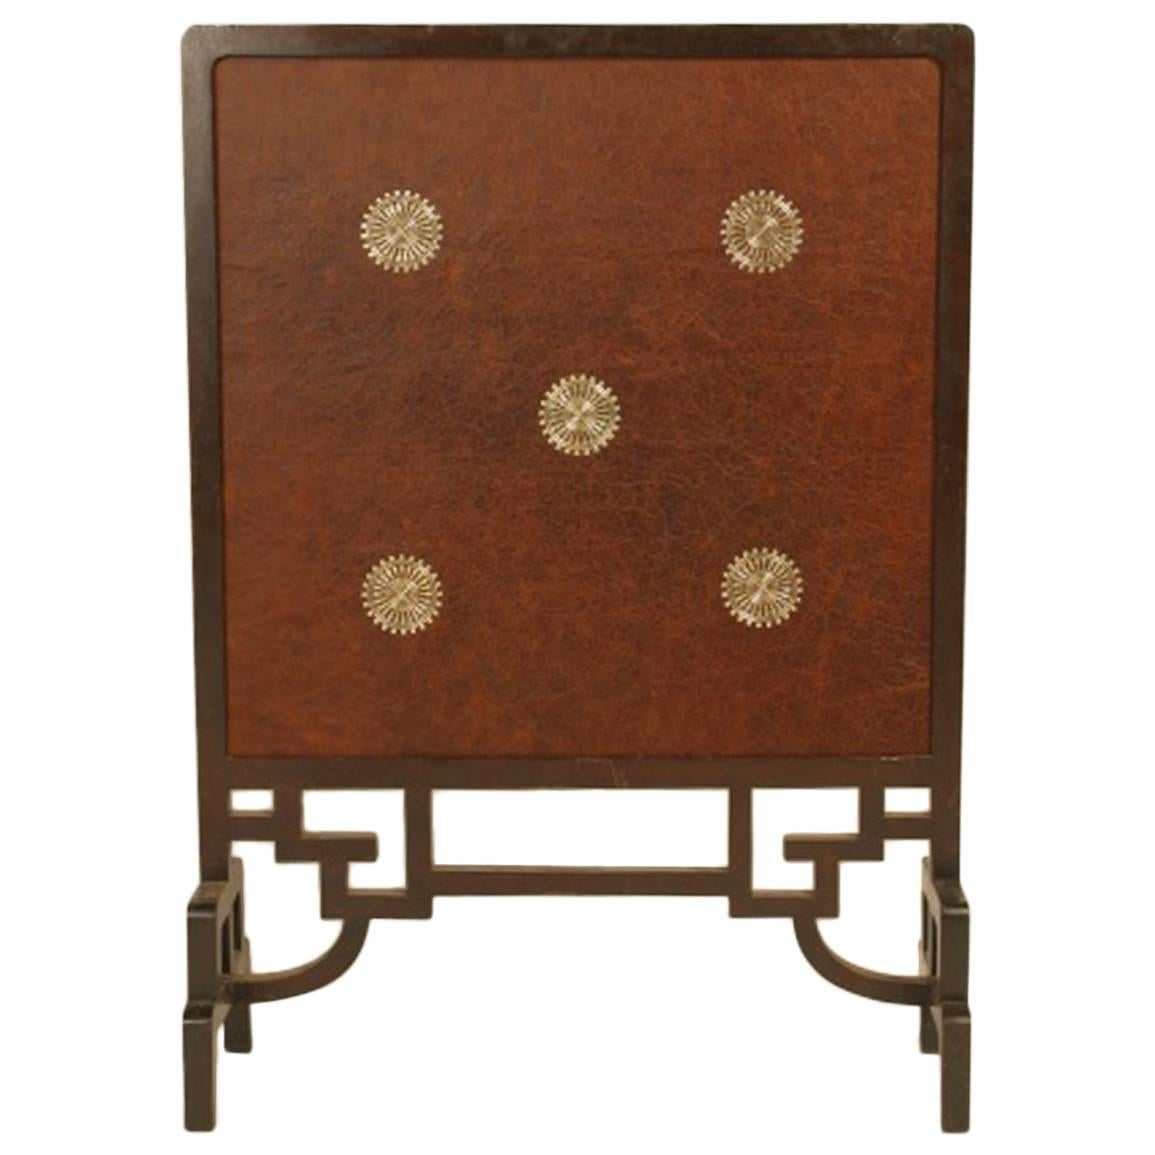 An Anglo-Japanese Fire Screen with Embossed Leather Designs by E. W. Godwin For Sale